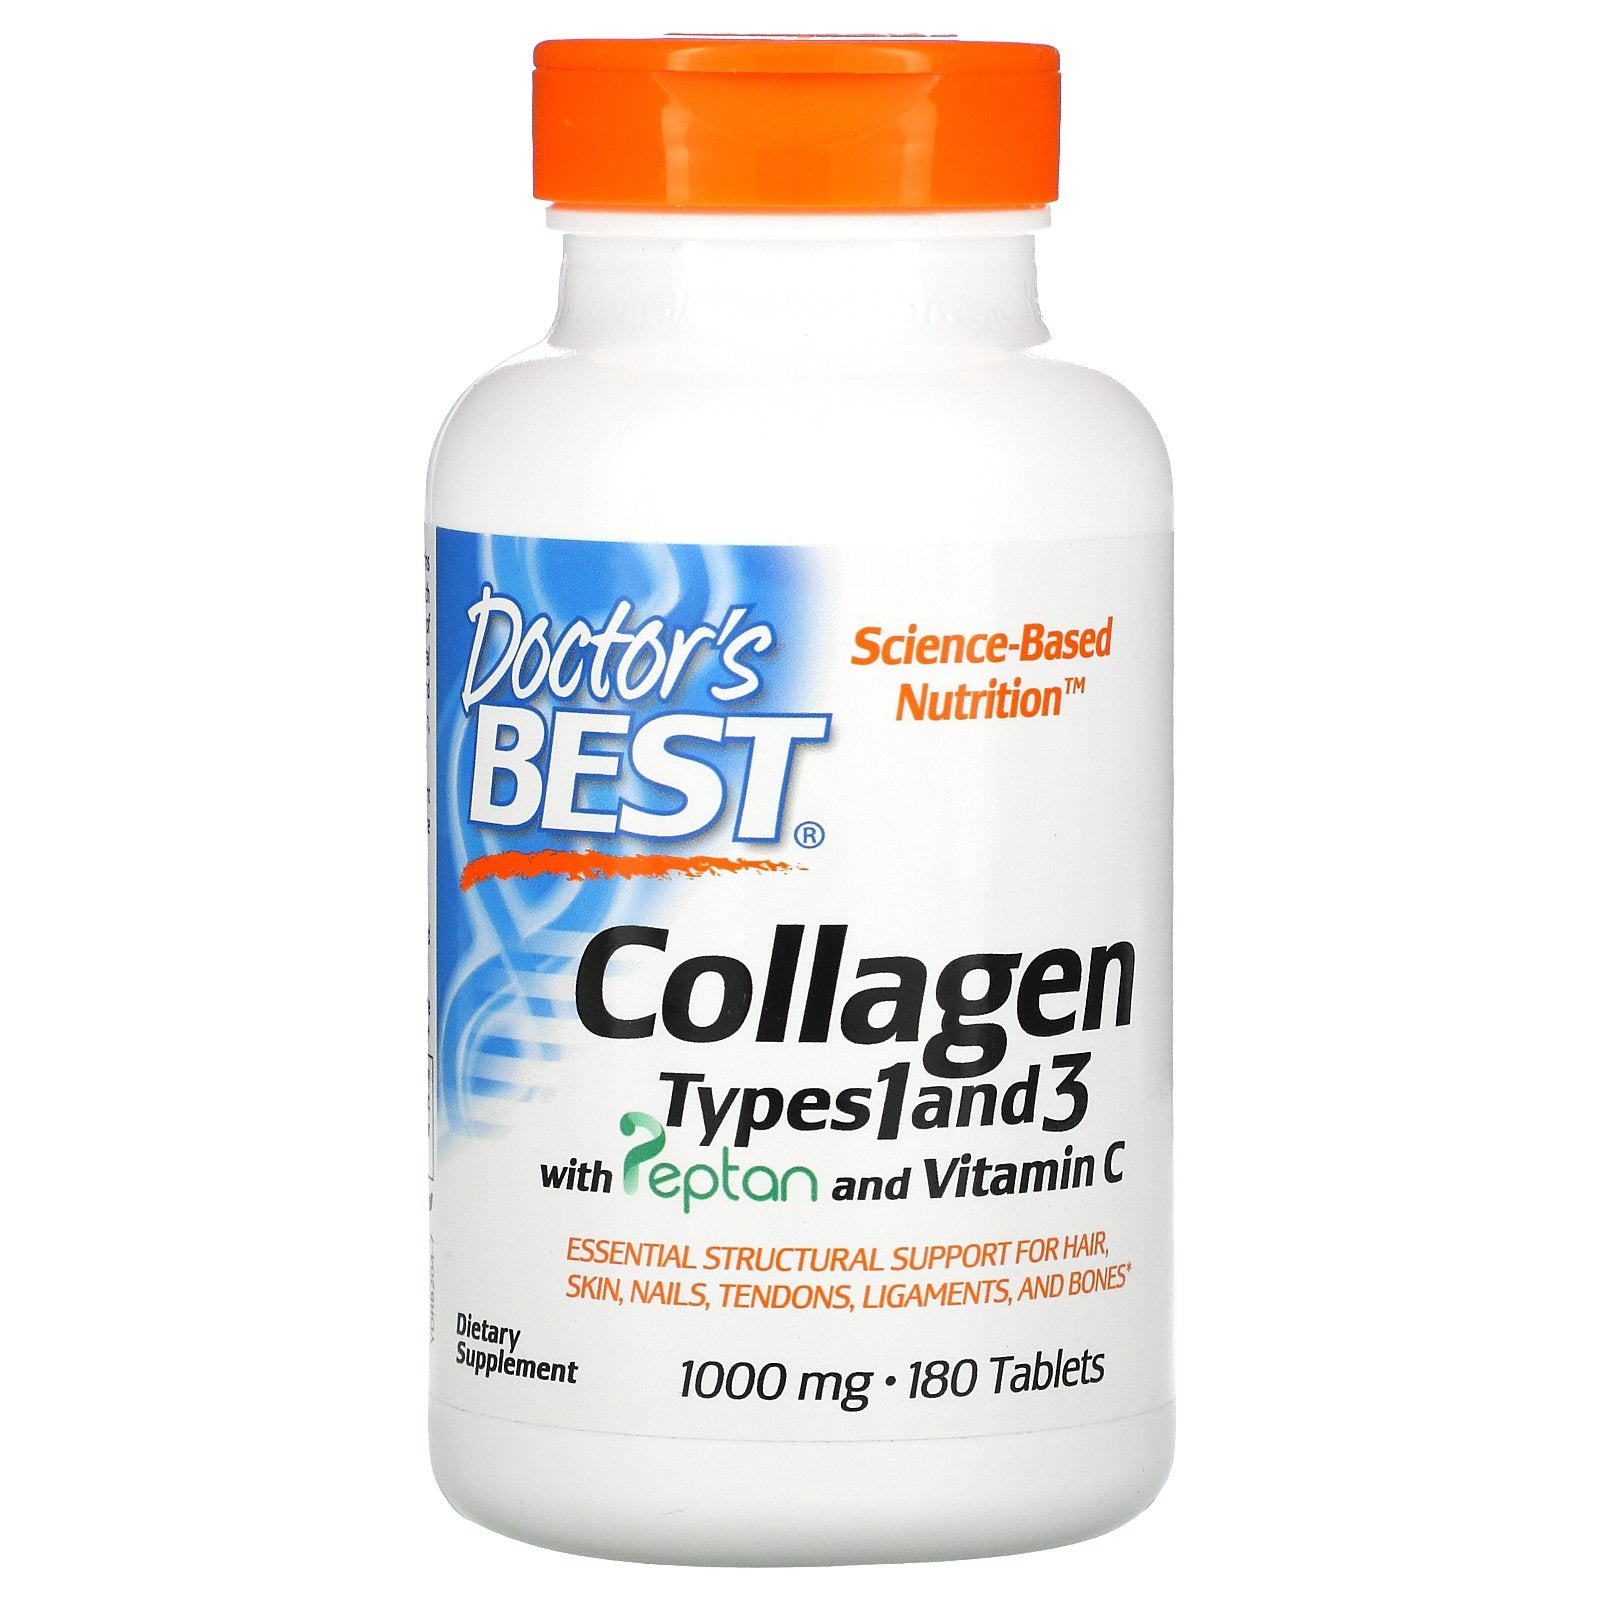 Doctor's Best, Collagen Types 1 and 3 with Peptan and Vitamin C, 1,000 mg